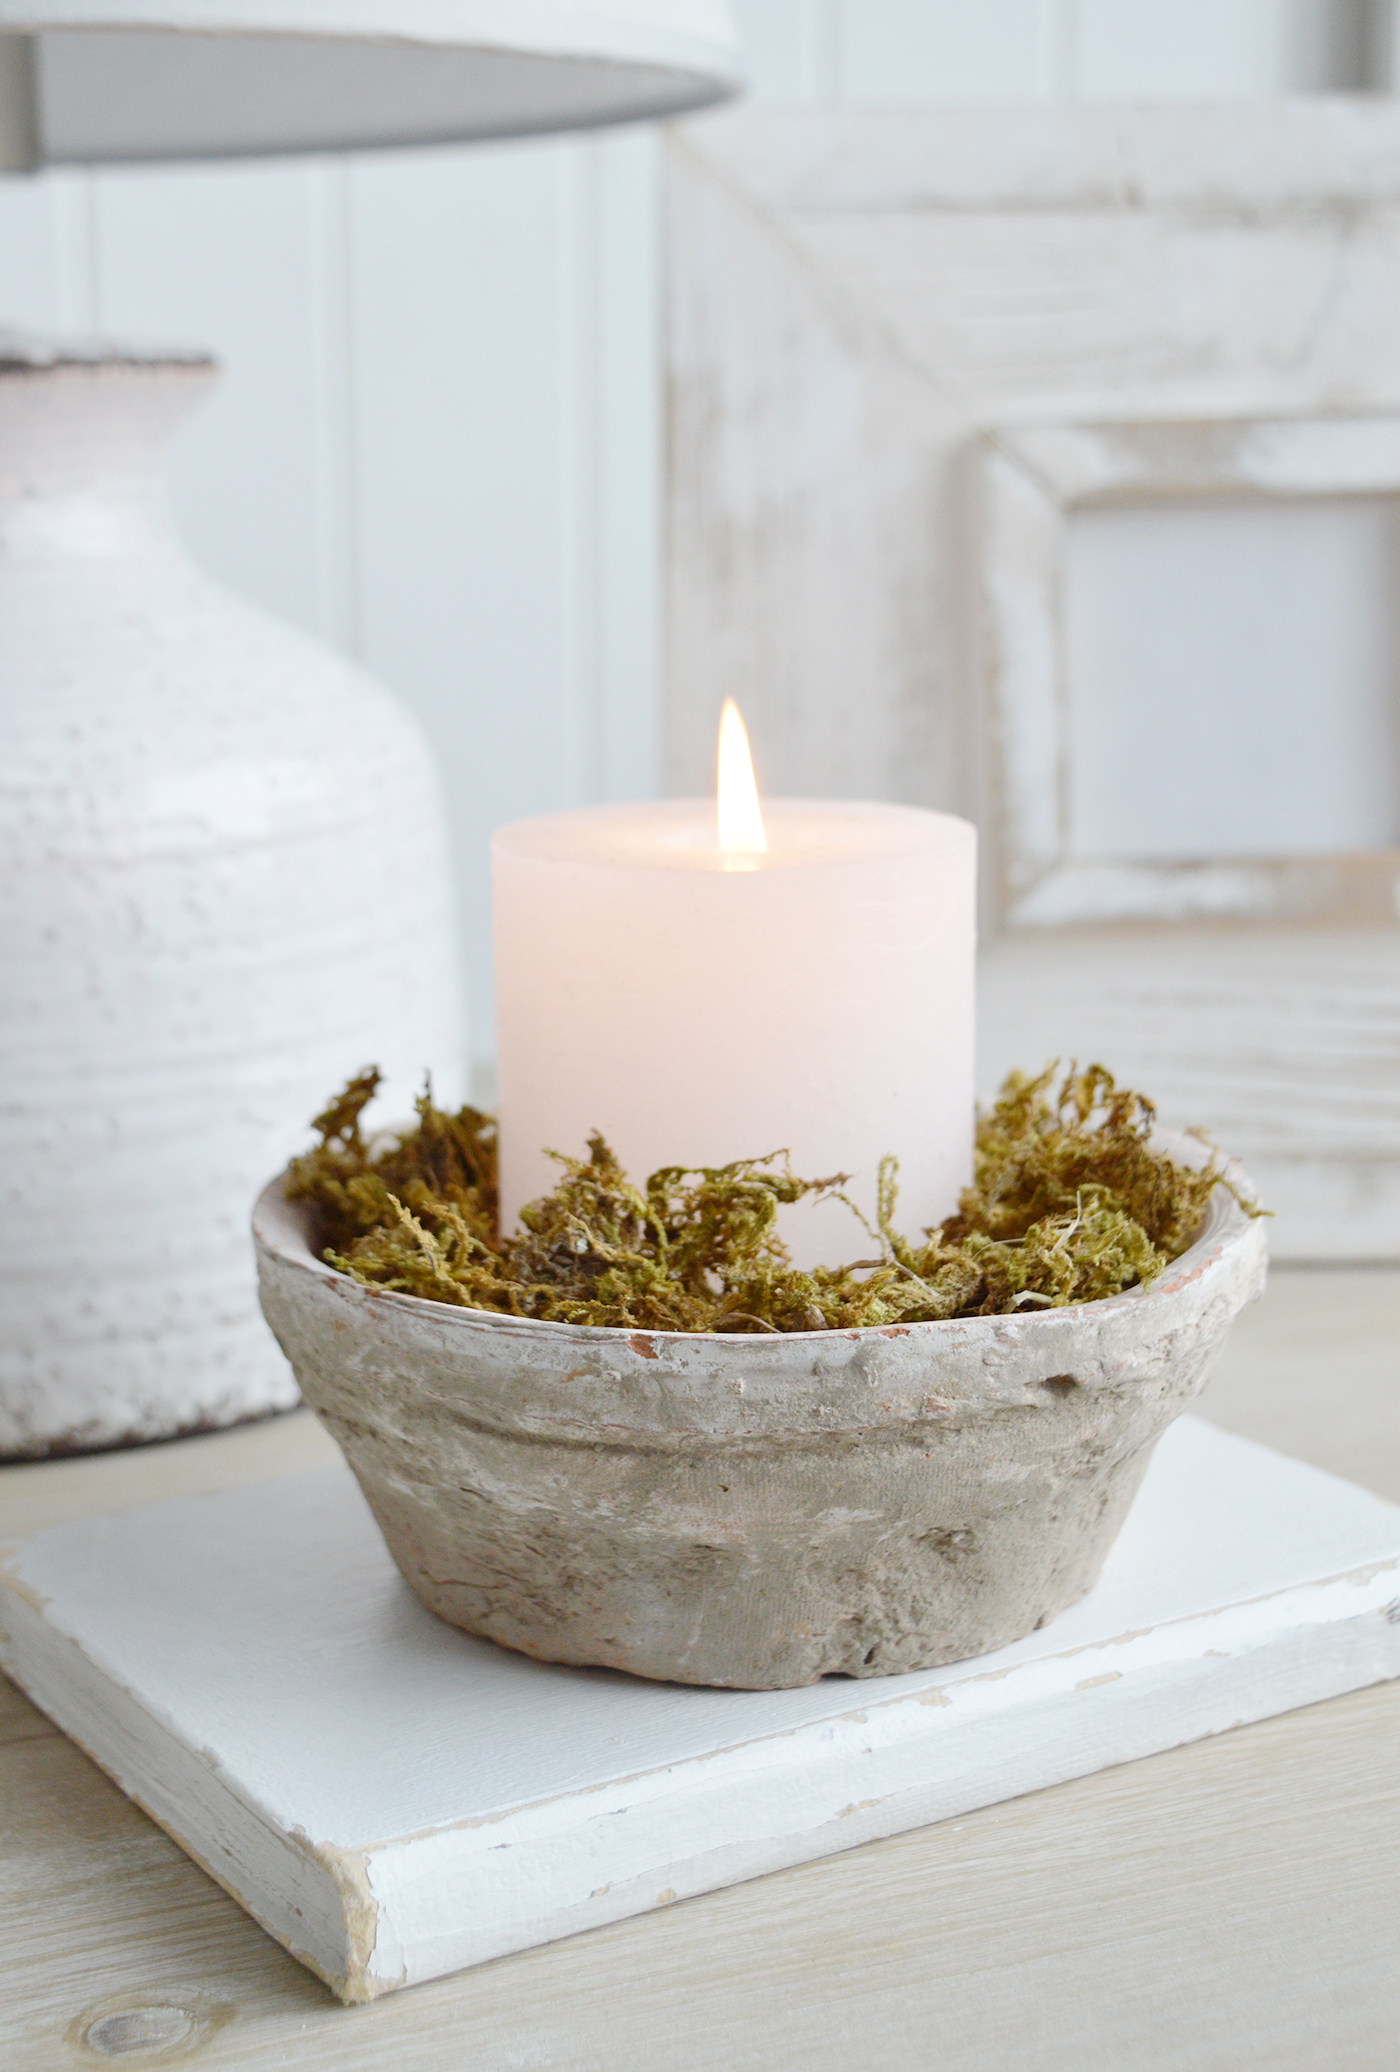 The terracotta rustic white bowl as a candle holder filled with moss for a natural look in a New England coastal or modern farmhouse home